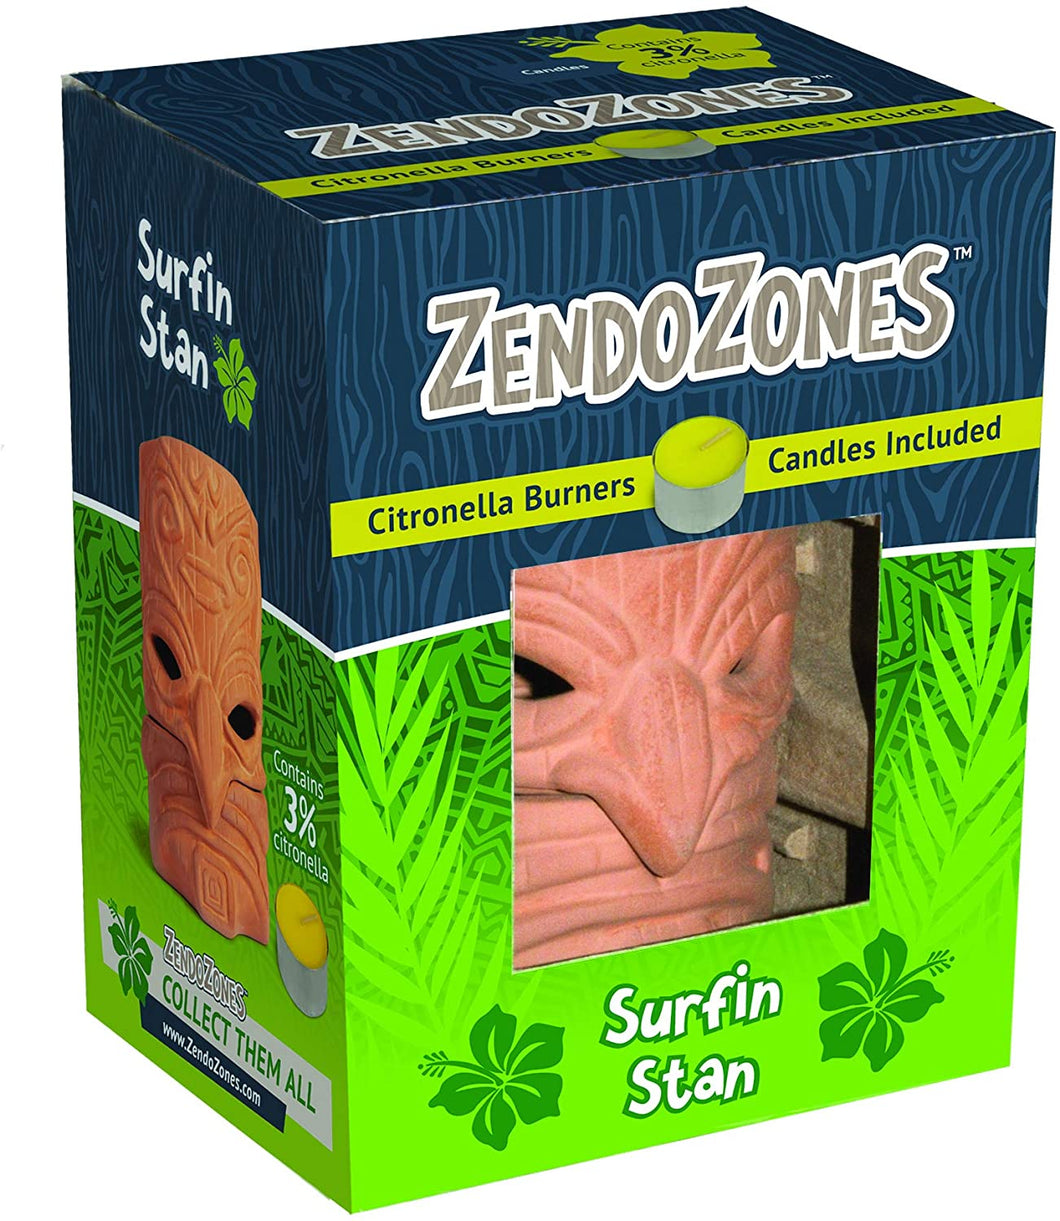 CHS ZendoZones Surfin Stan All-Natural Citronella Candle Burner with 3 Candles All-natural Citronella Candle burns for up to 8 hours Perfect for patios, decks, backyards, campsites, poolside, and more Portable burner figurine to help you find your Zen anytime and anywhere Place candle in burner, light candle, you are in the ZendoZone INCLUDES 3 Citronella Candles with 3% Citronella